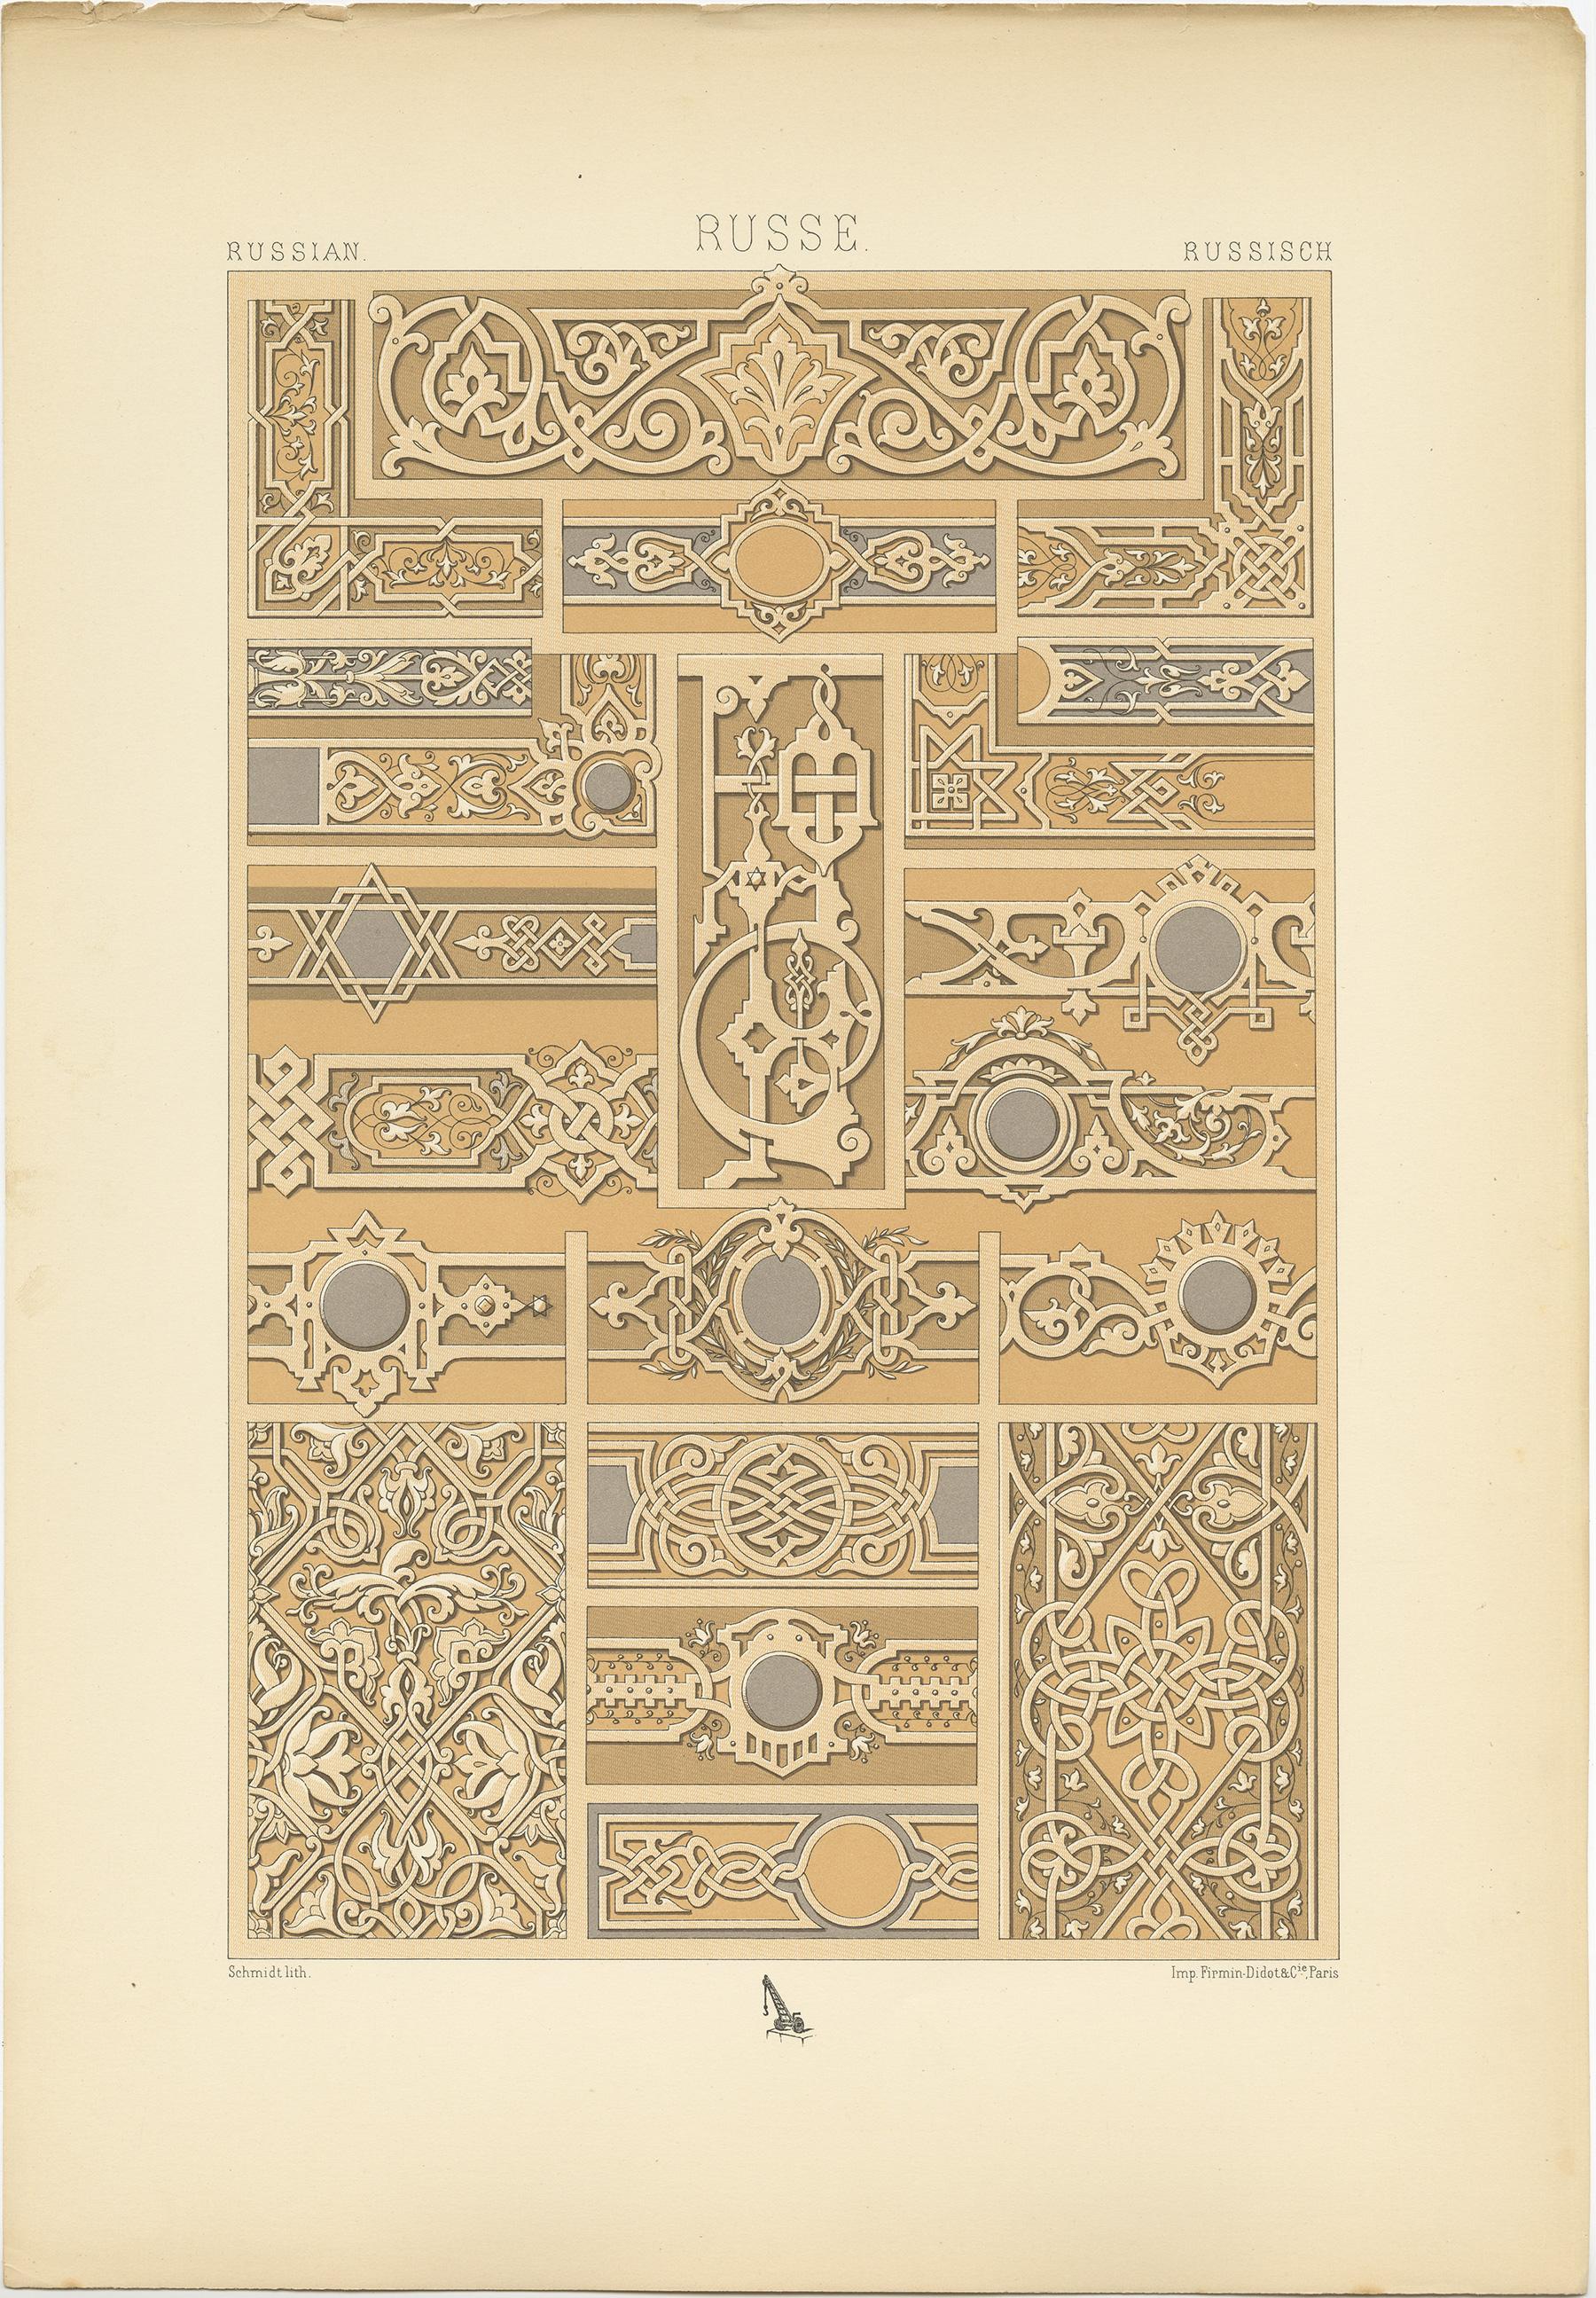 Antique print titled 'Russian - Russe - Russische'. Chromolithograph of motifs from metalwork ornaments. This print originates from 'l'Ornement Polychrome' by Auguste Racinet. Published circa 1890.